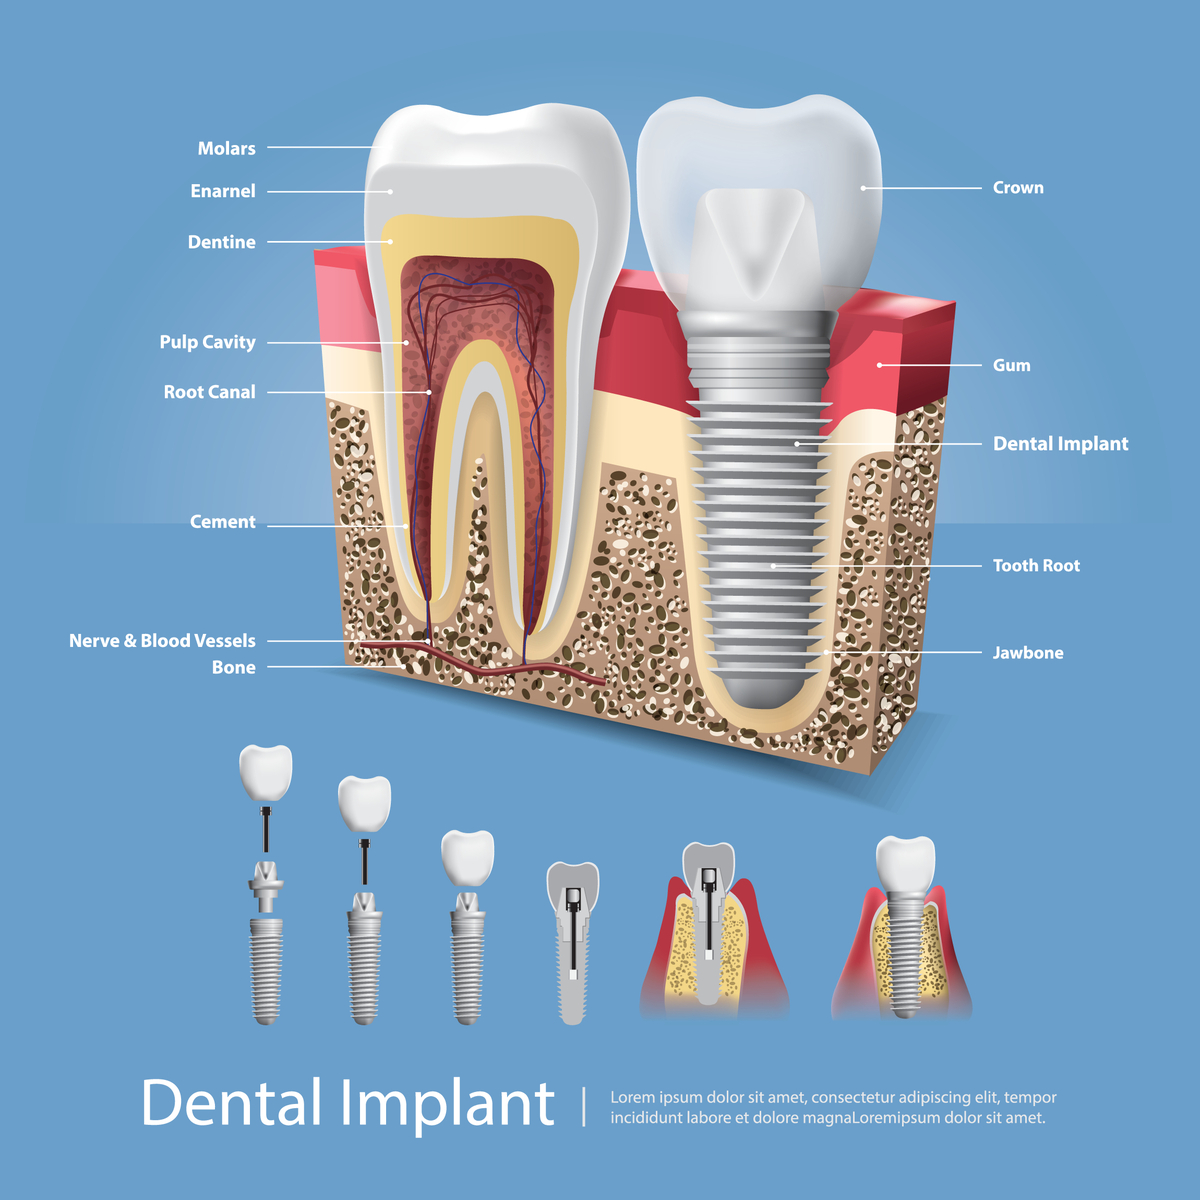 Dental Implant Bel-Nor, MO | Tooth Pain | Restorative Dentistry | Cosmetic Dentistry Near Bel-Nor, MO